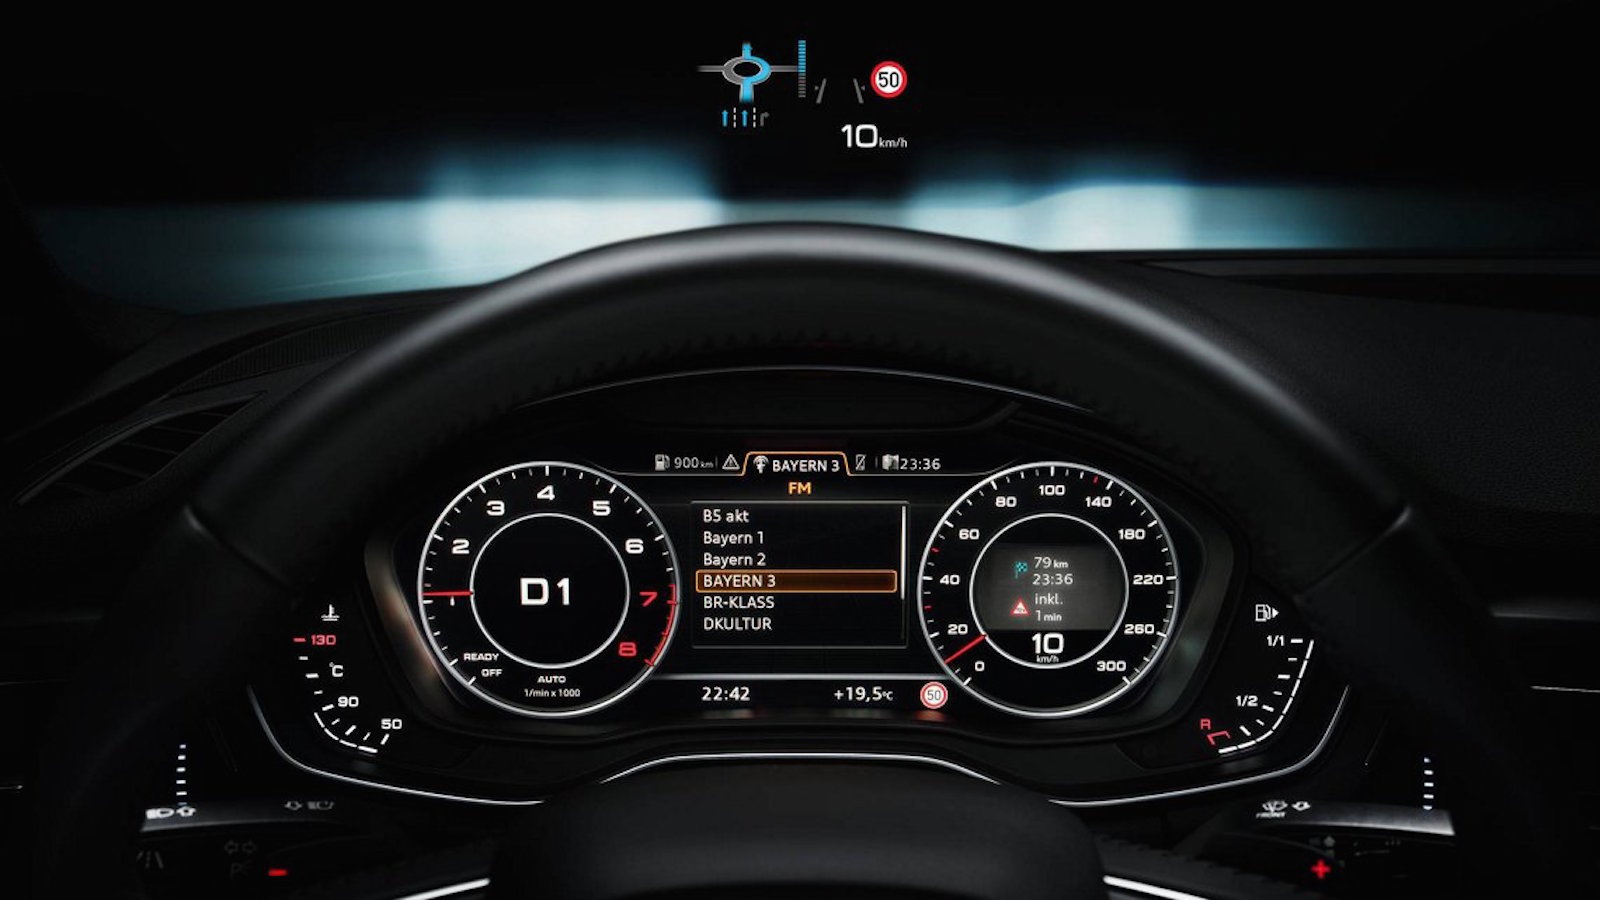 Daily Slideshow: All Need to Know About Audi's HUD | Audiworld